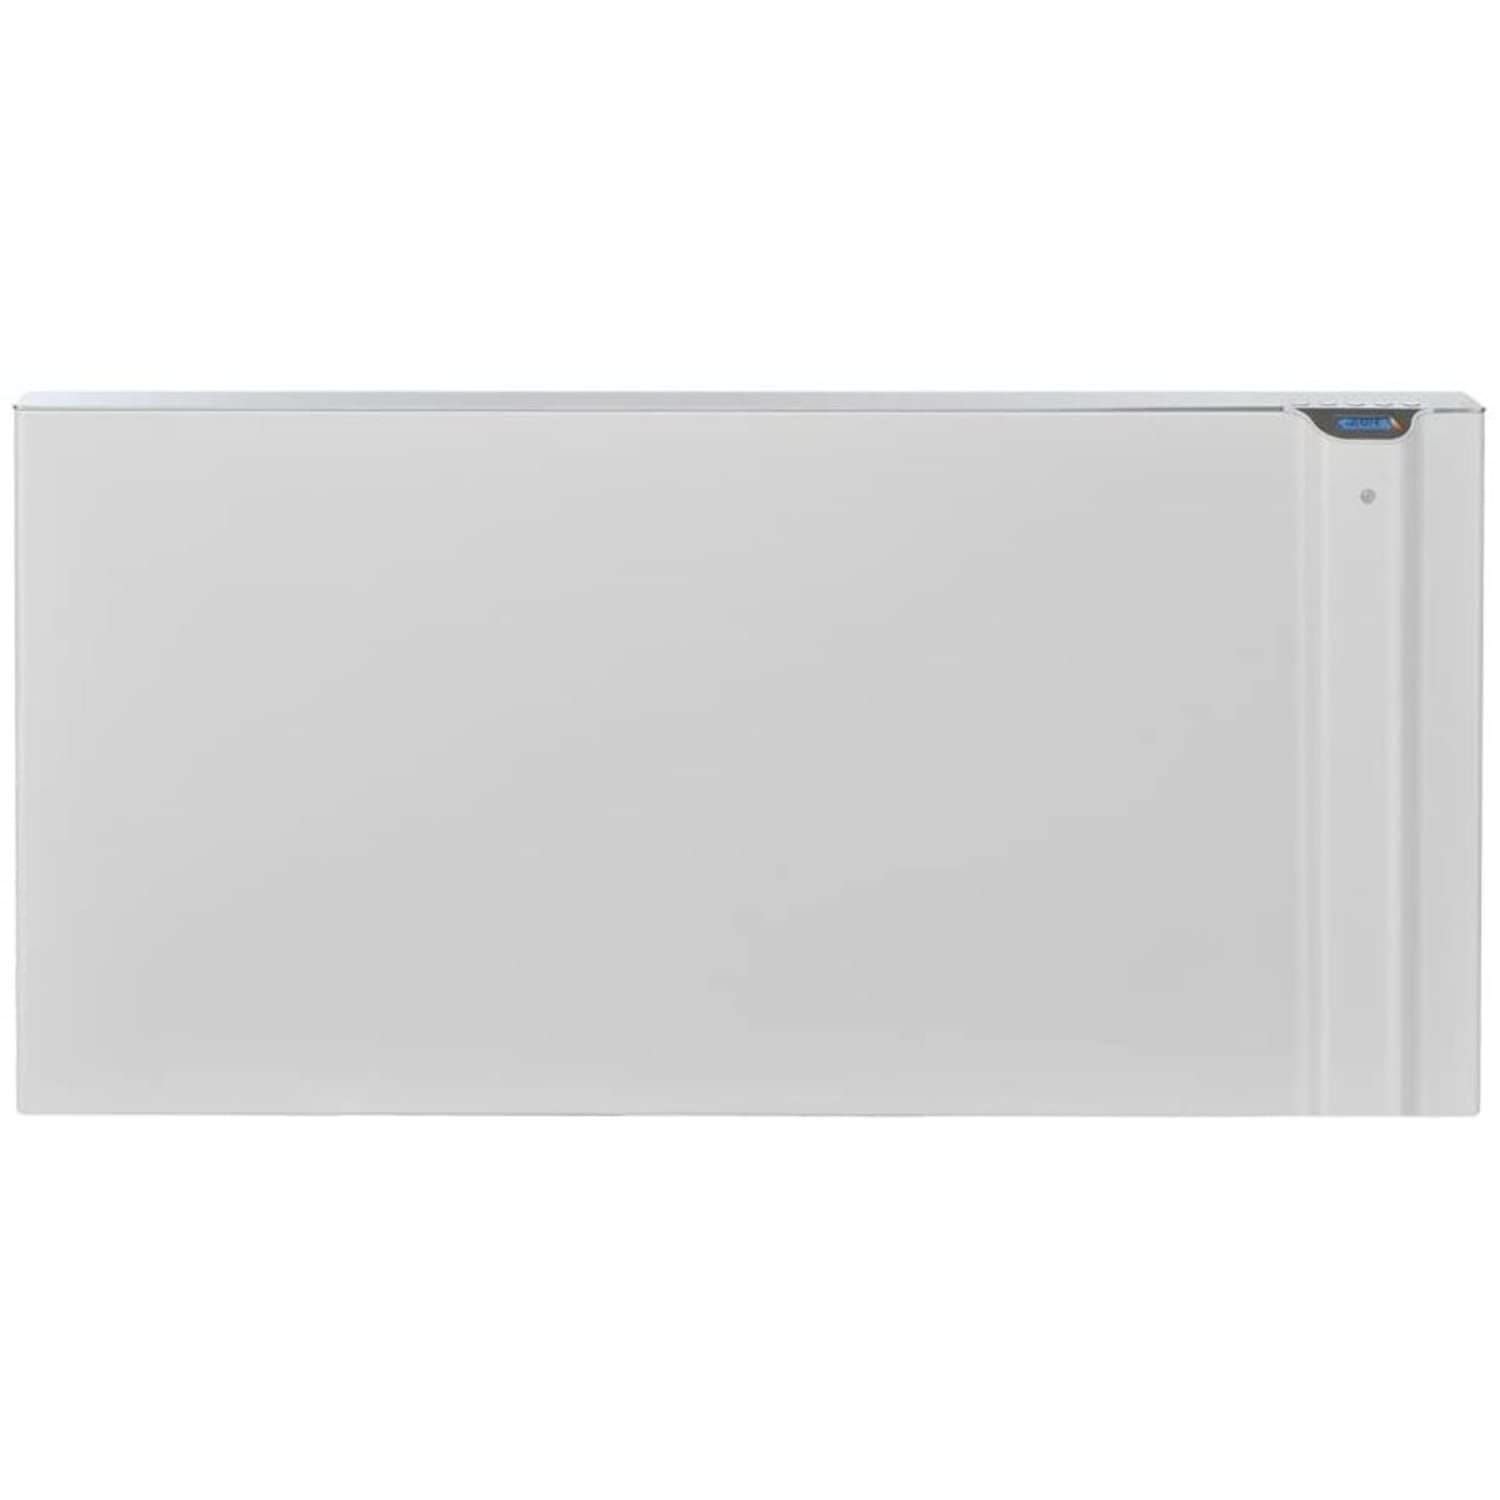 Low Consumption White Wall Mounted Radia 